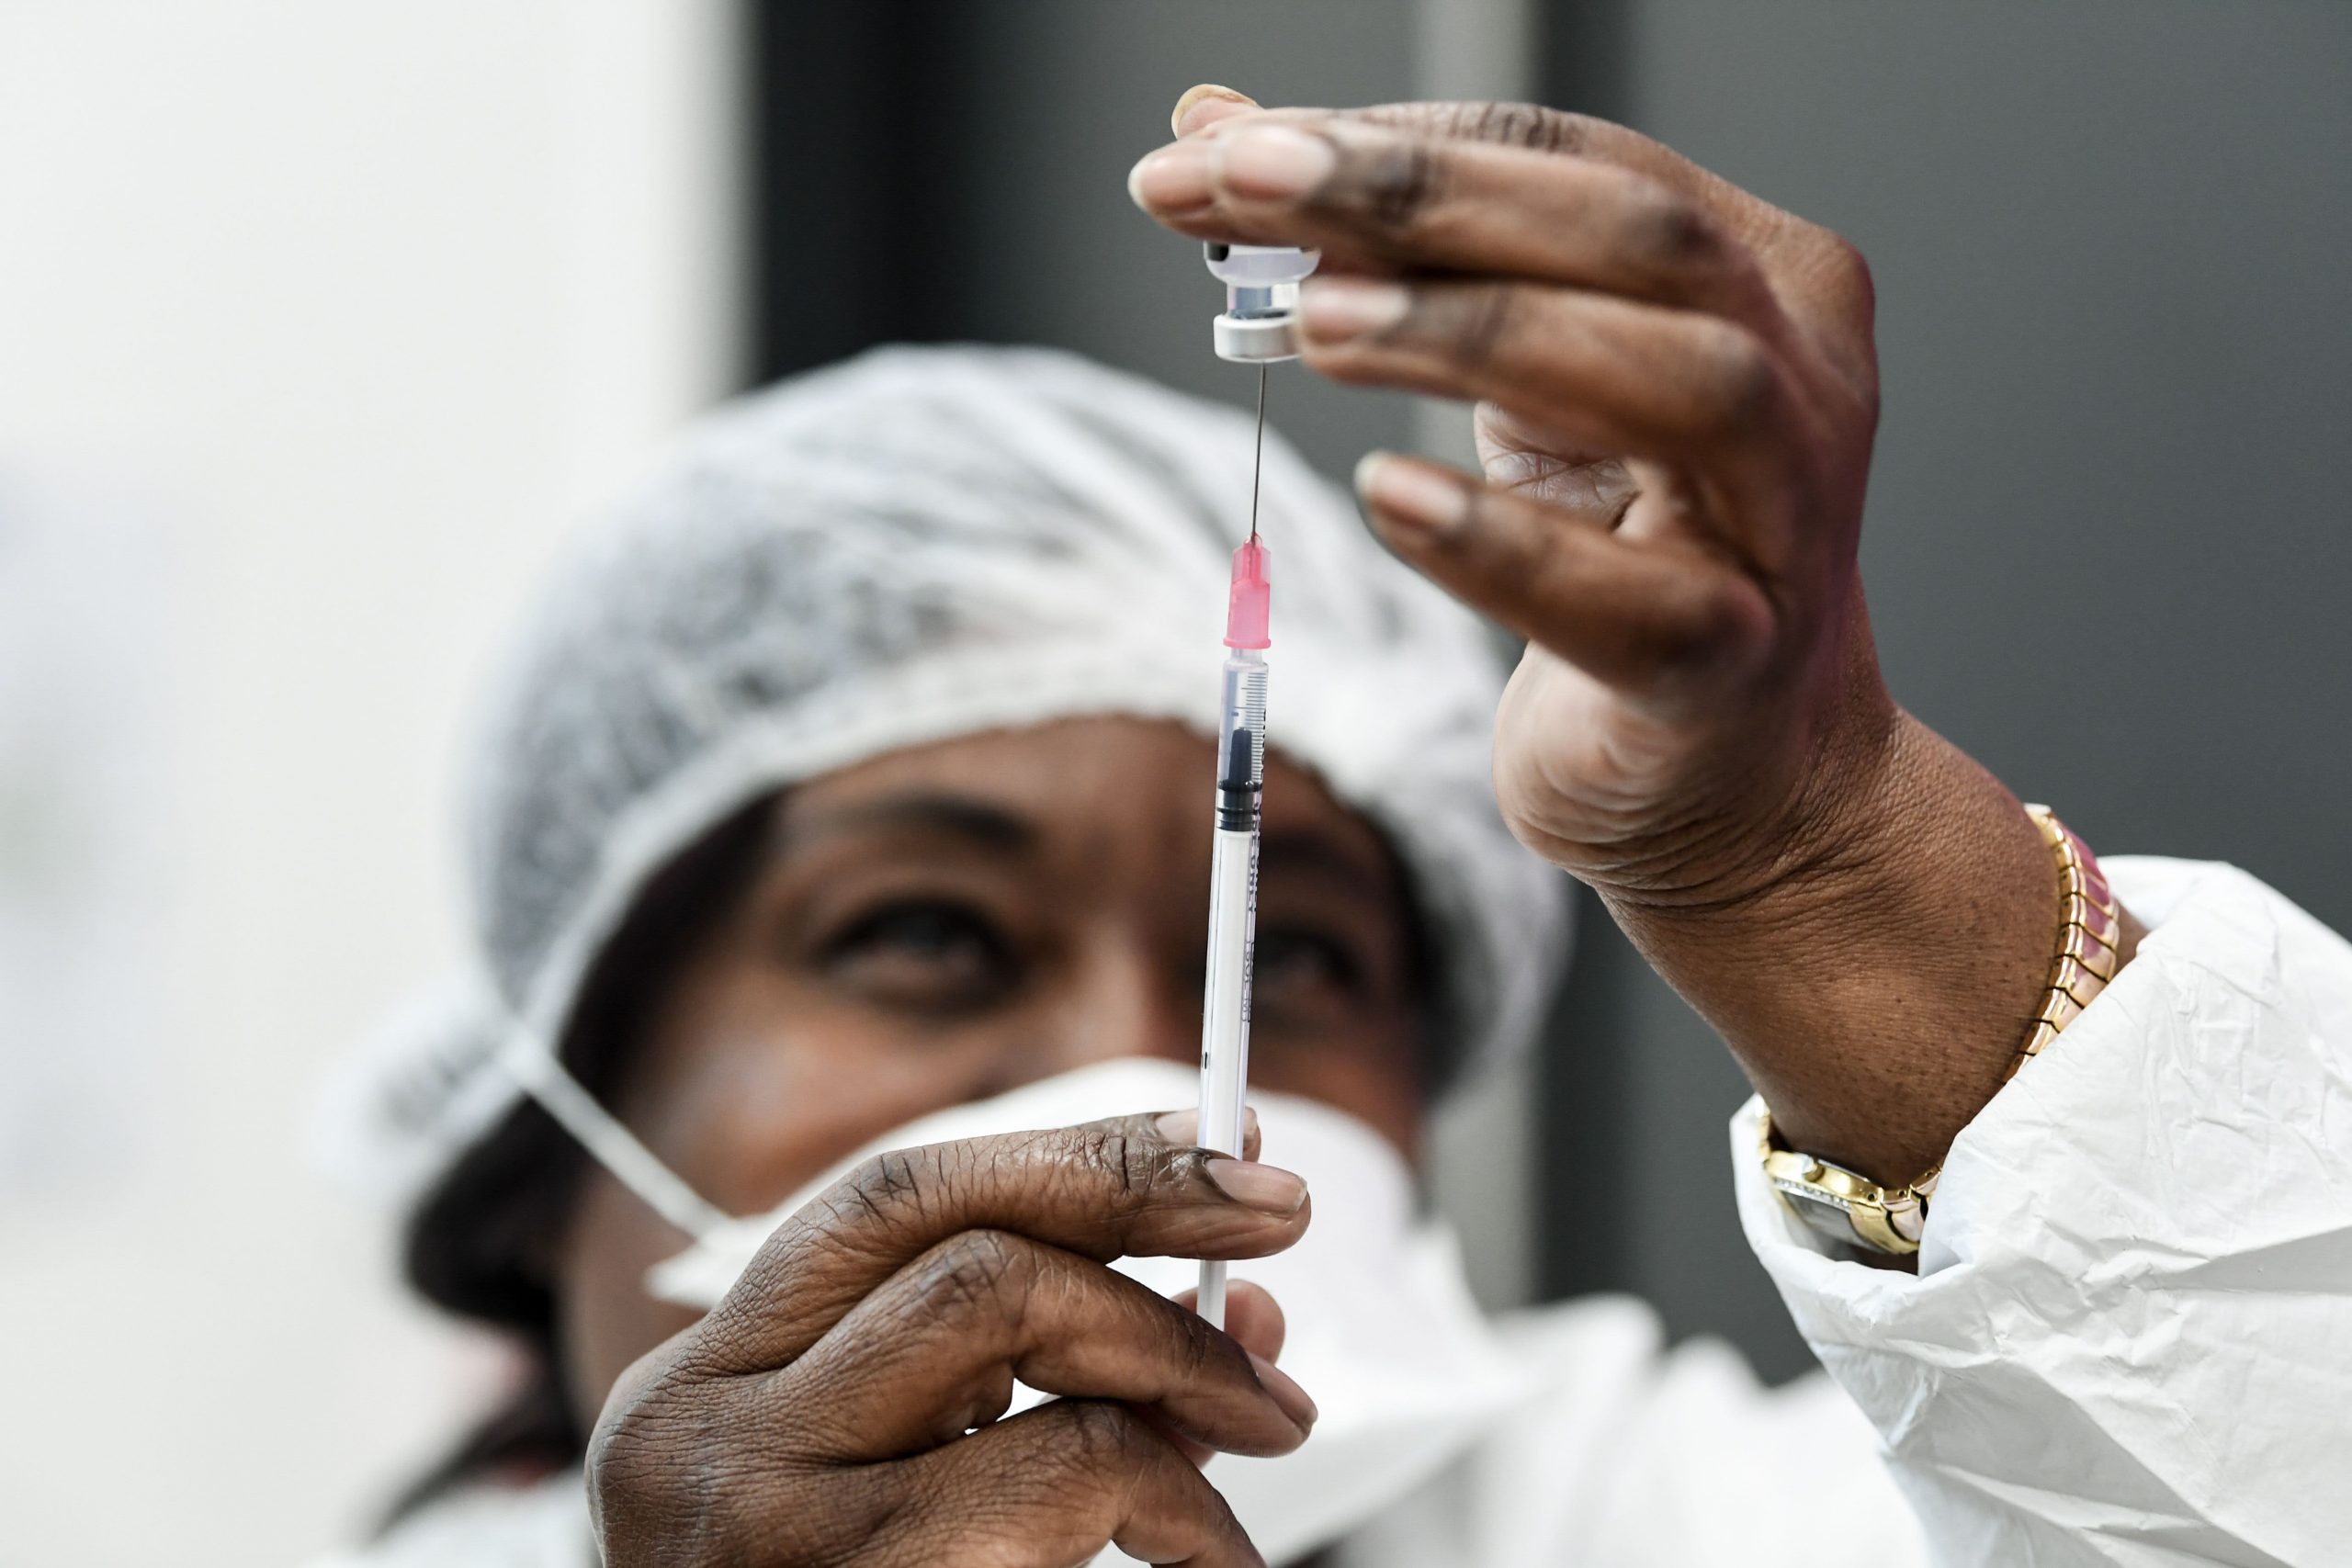 Pfizer to provide as much as 40 million Covid vaccine doses to Covax international program